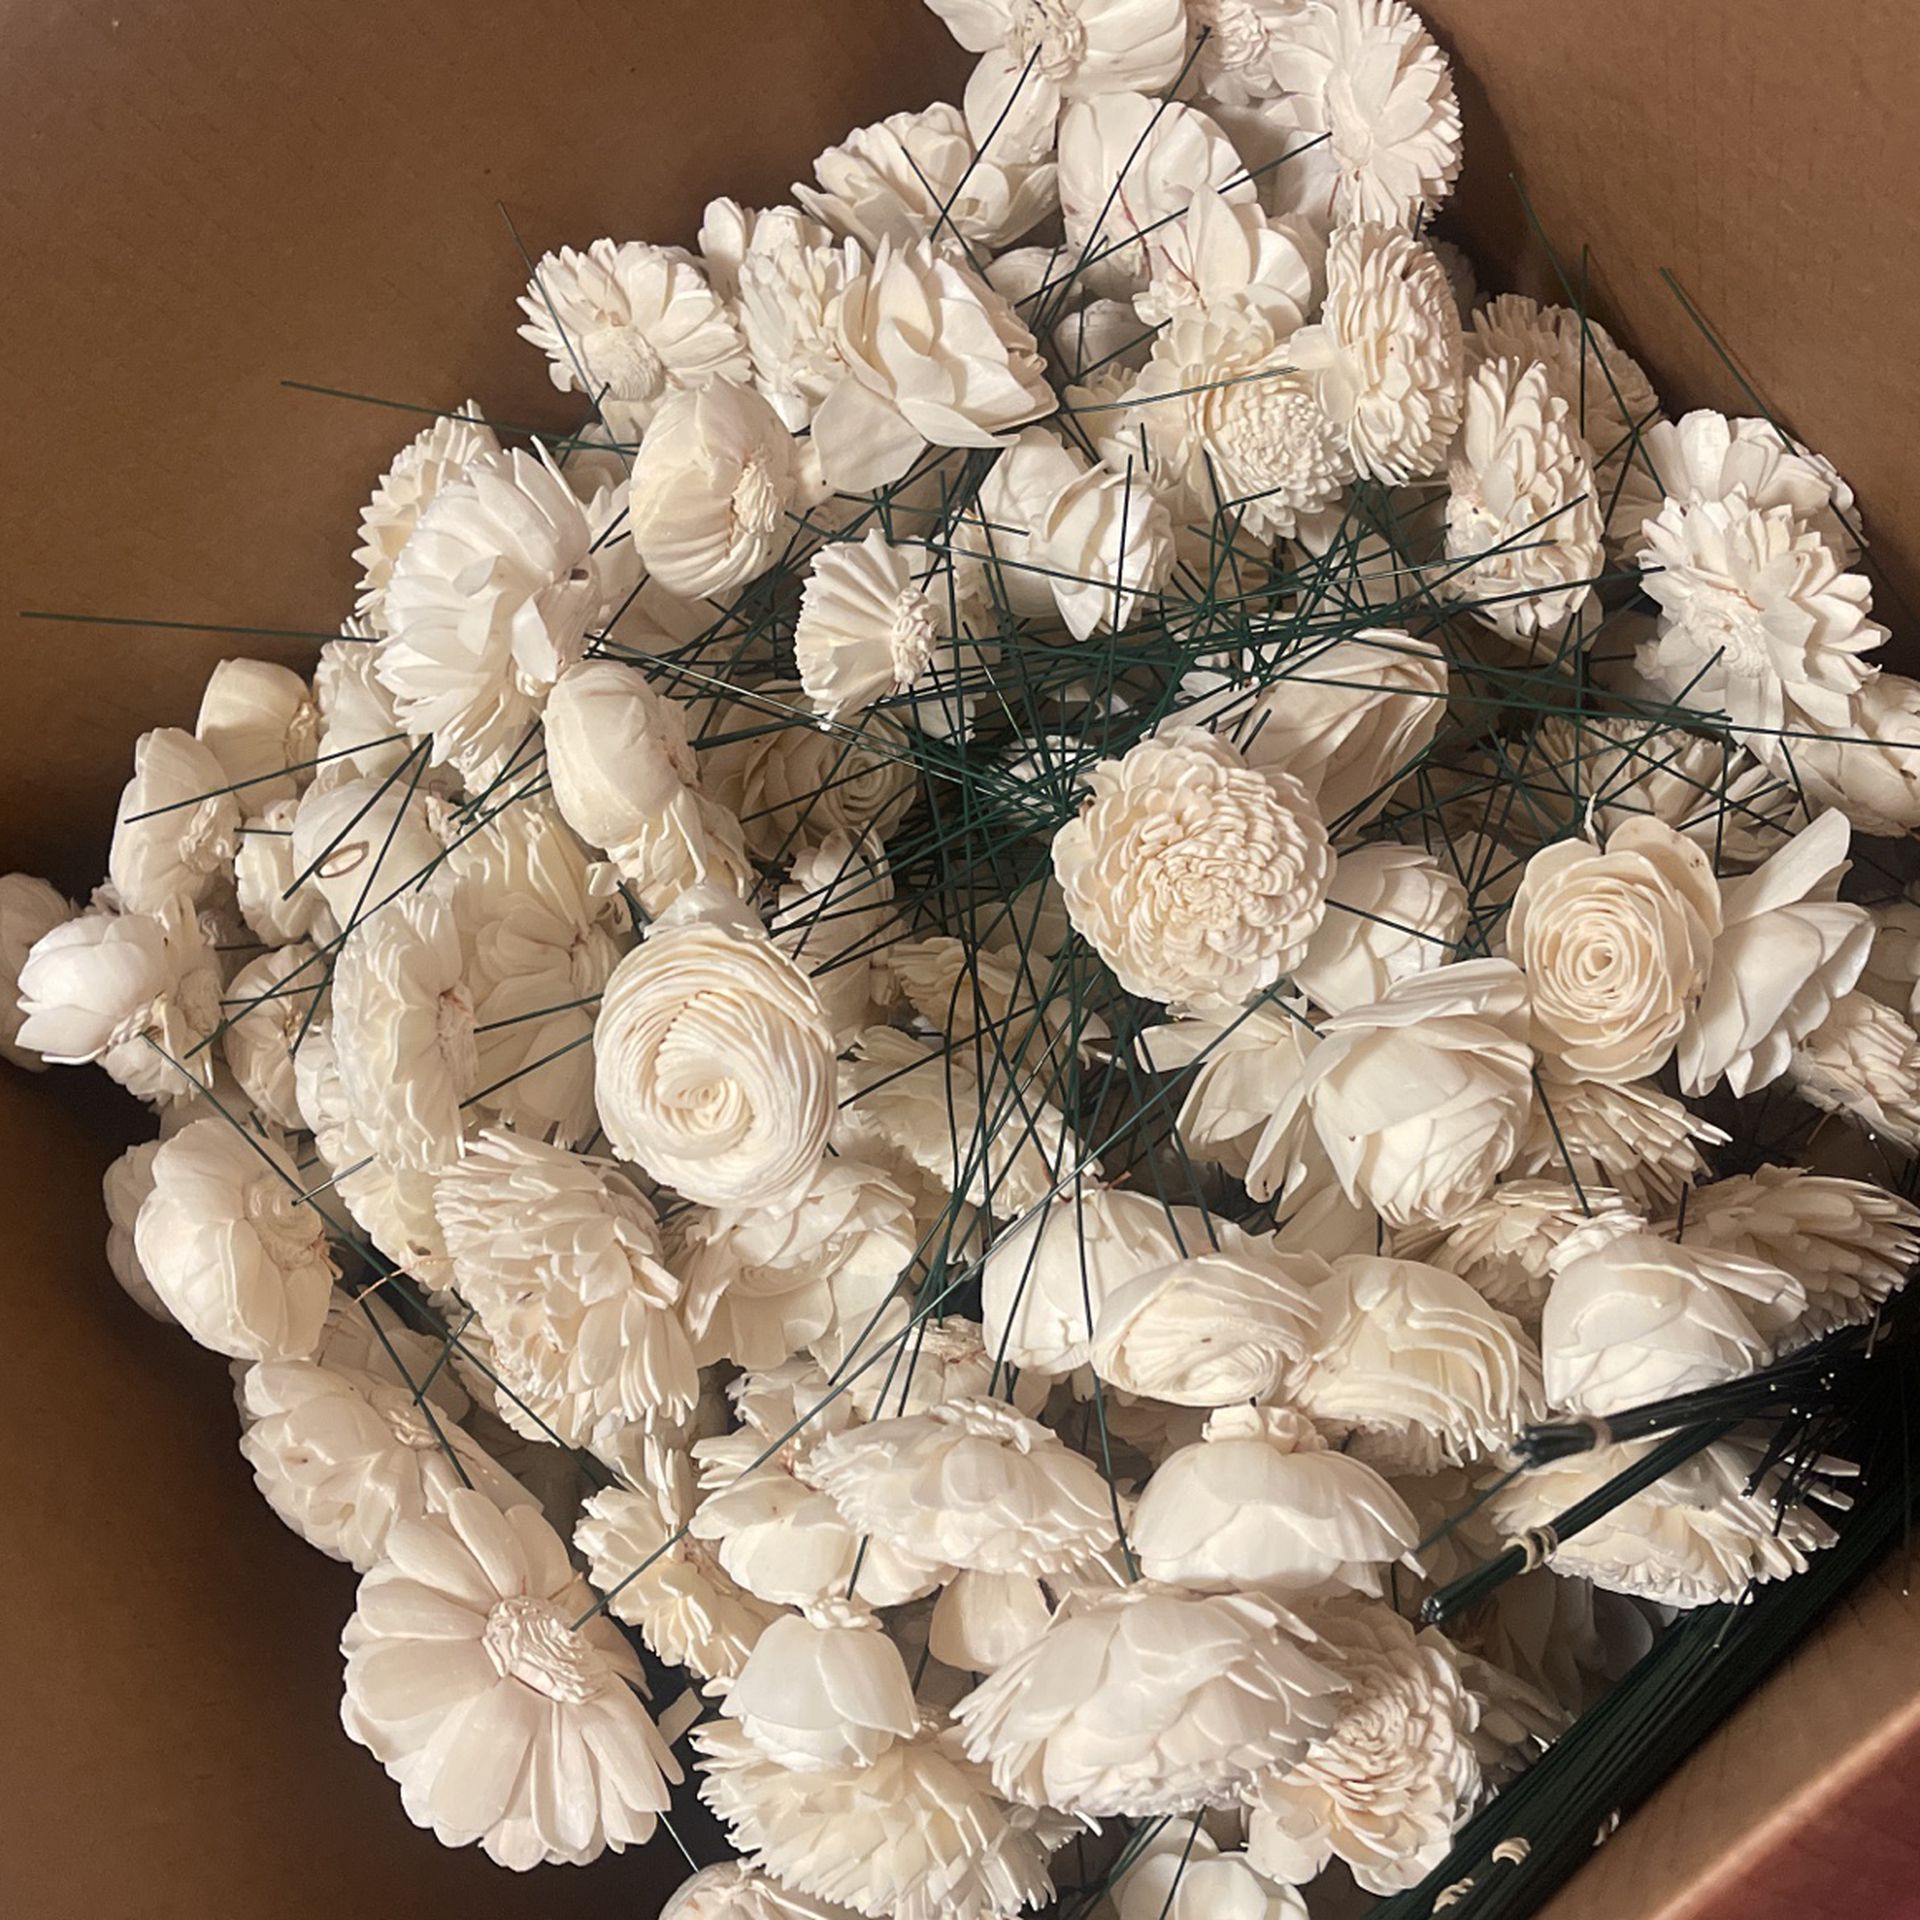 Roughly 500 Sola wood flowers 